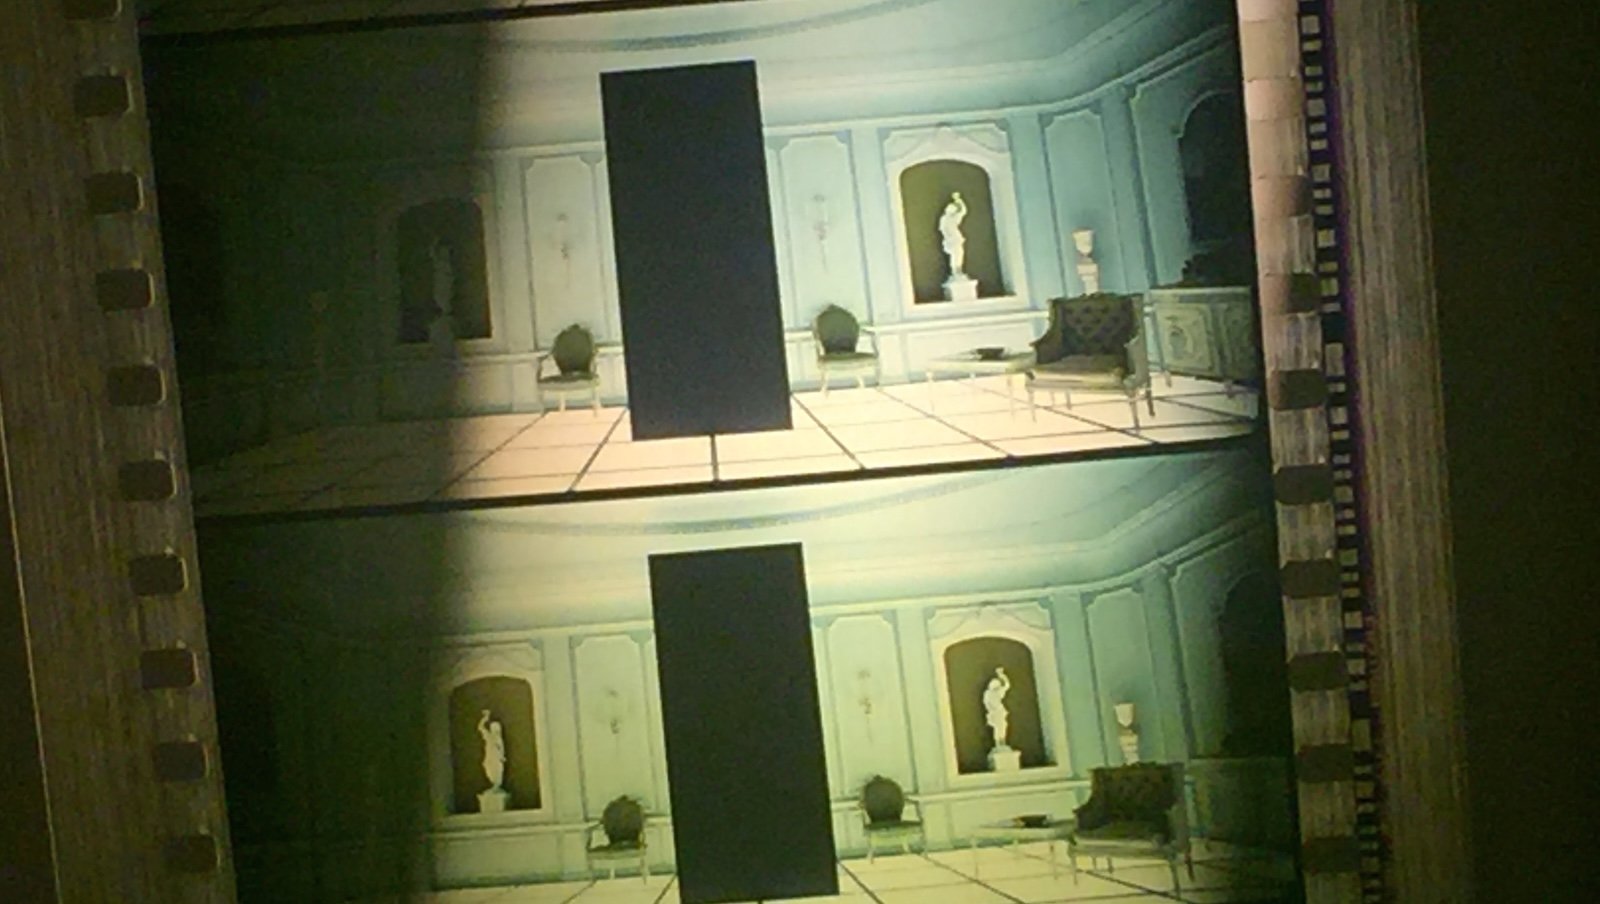 Two frames from the film 2001: A Space Odyssey showing the film projector sprockets on the side. The image is of a large black rectangle monolith standing straight in a white, ornate room with a glowing floor and statuaries on the walls.